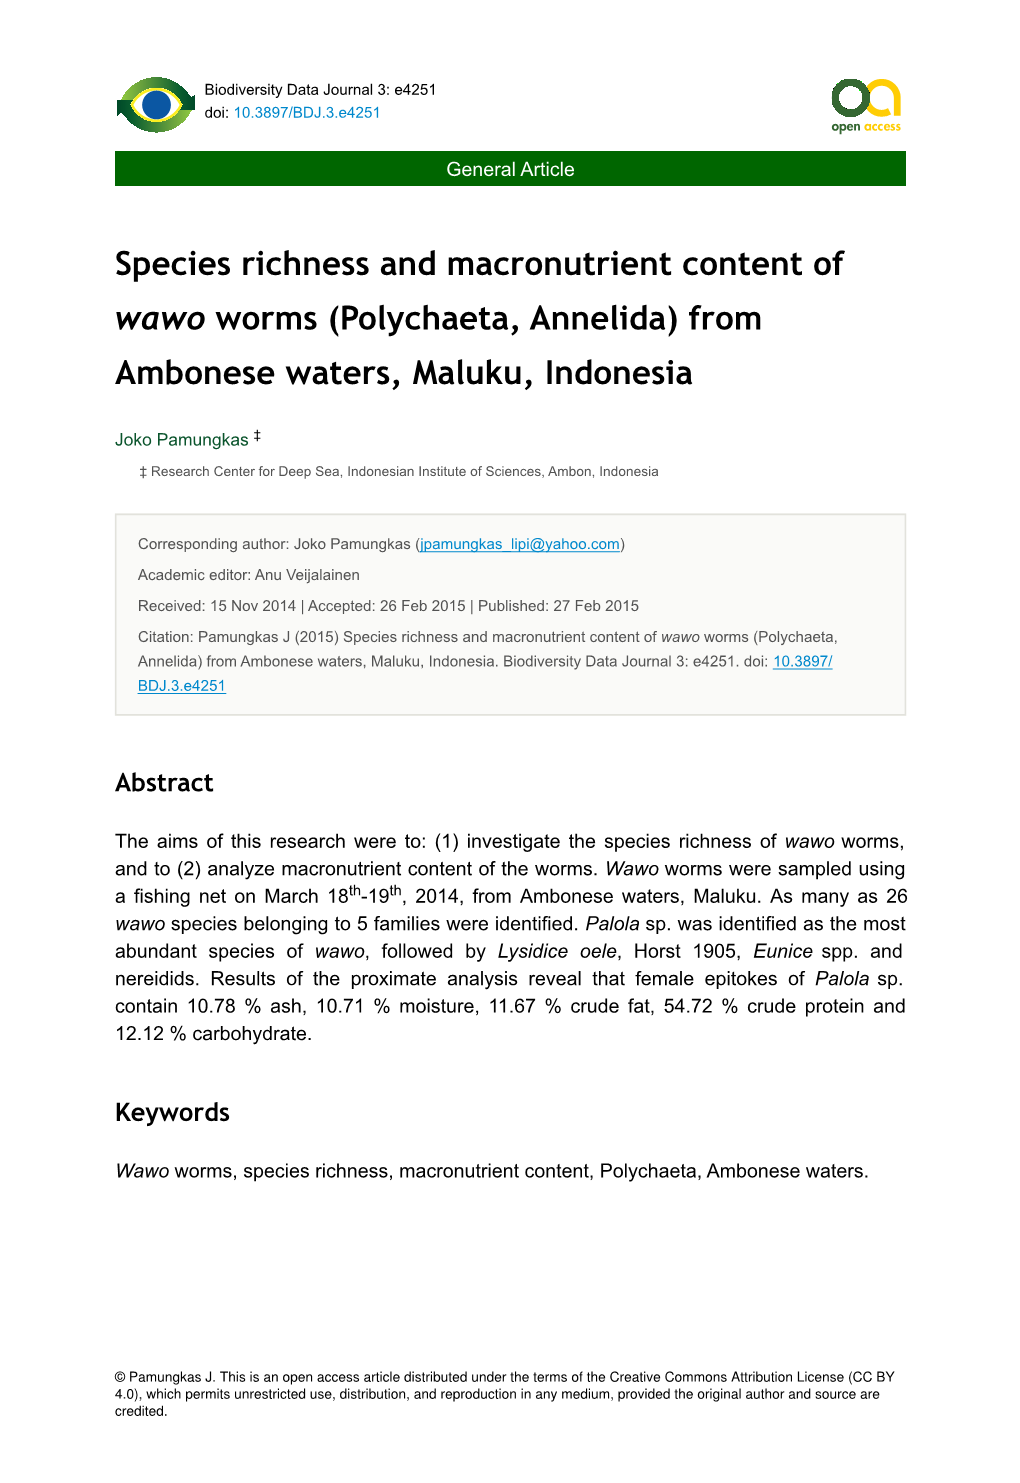 Species Richness and Macronutrient Content of Wawo Worms (Polychaeta, Annelida) from Ambonese Waters, Maluku, Indonesia